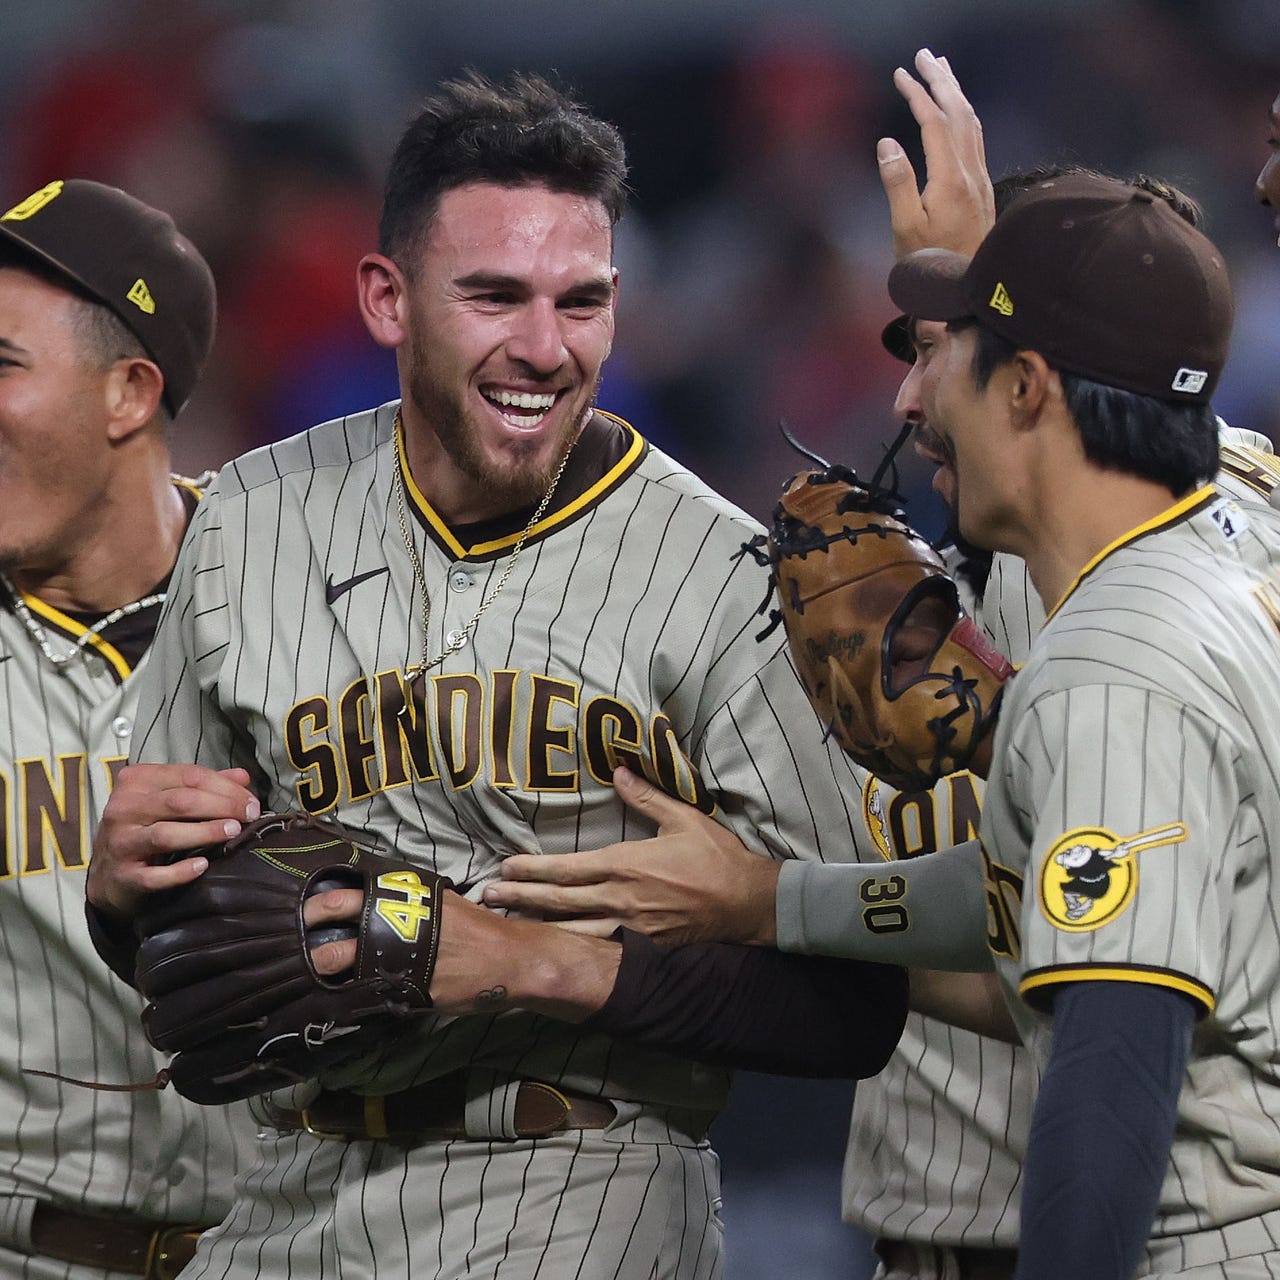 Padres' Joe Musgrove throws historic no-hitter for team he rooted for